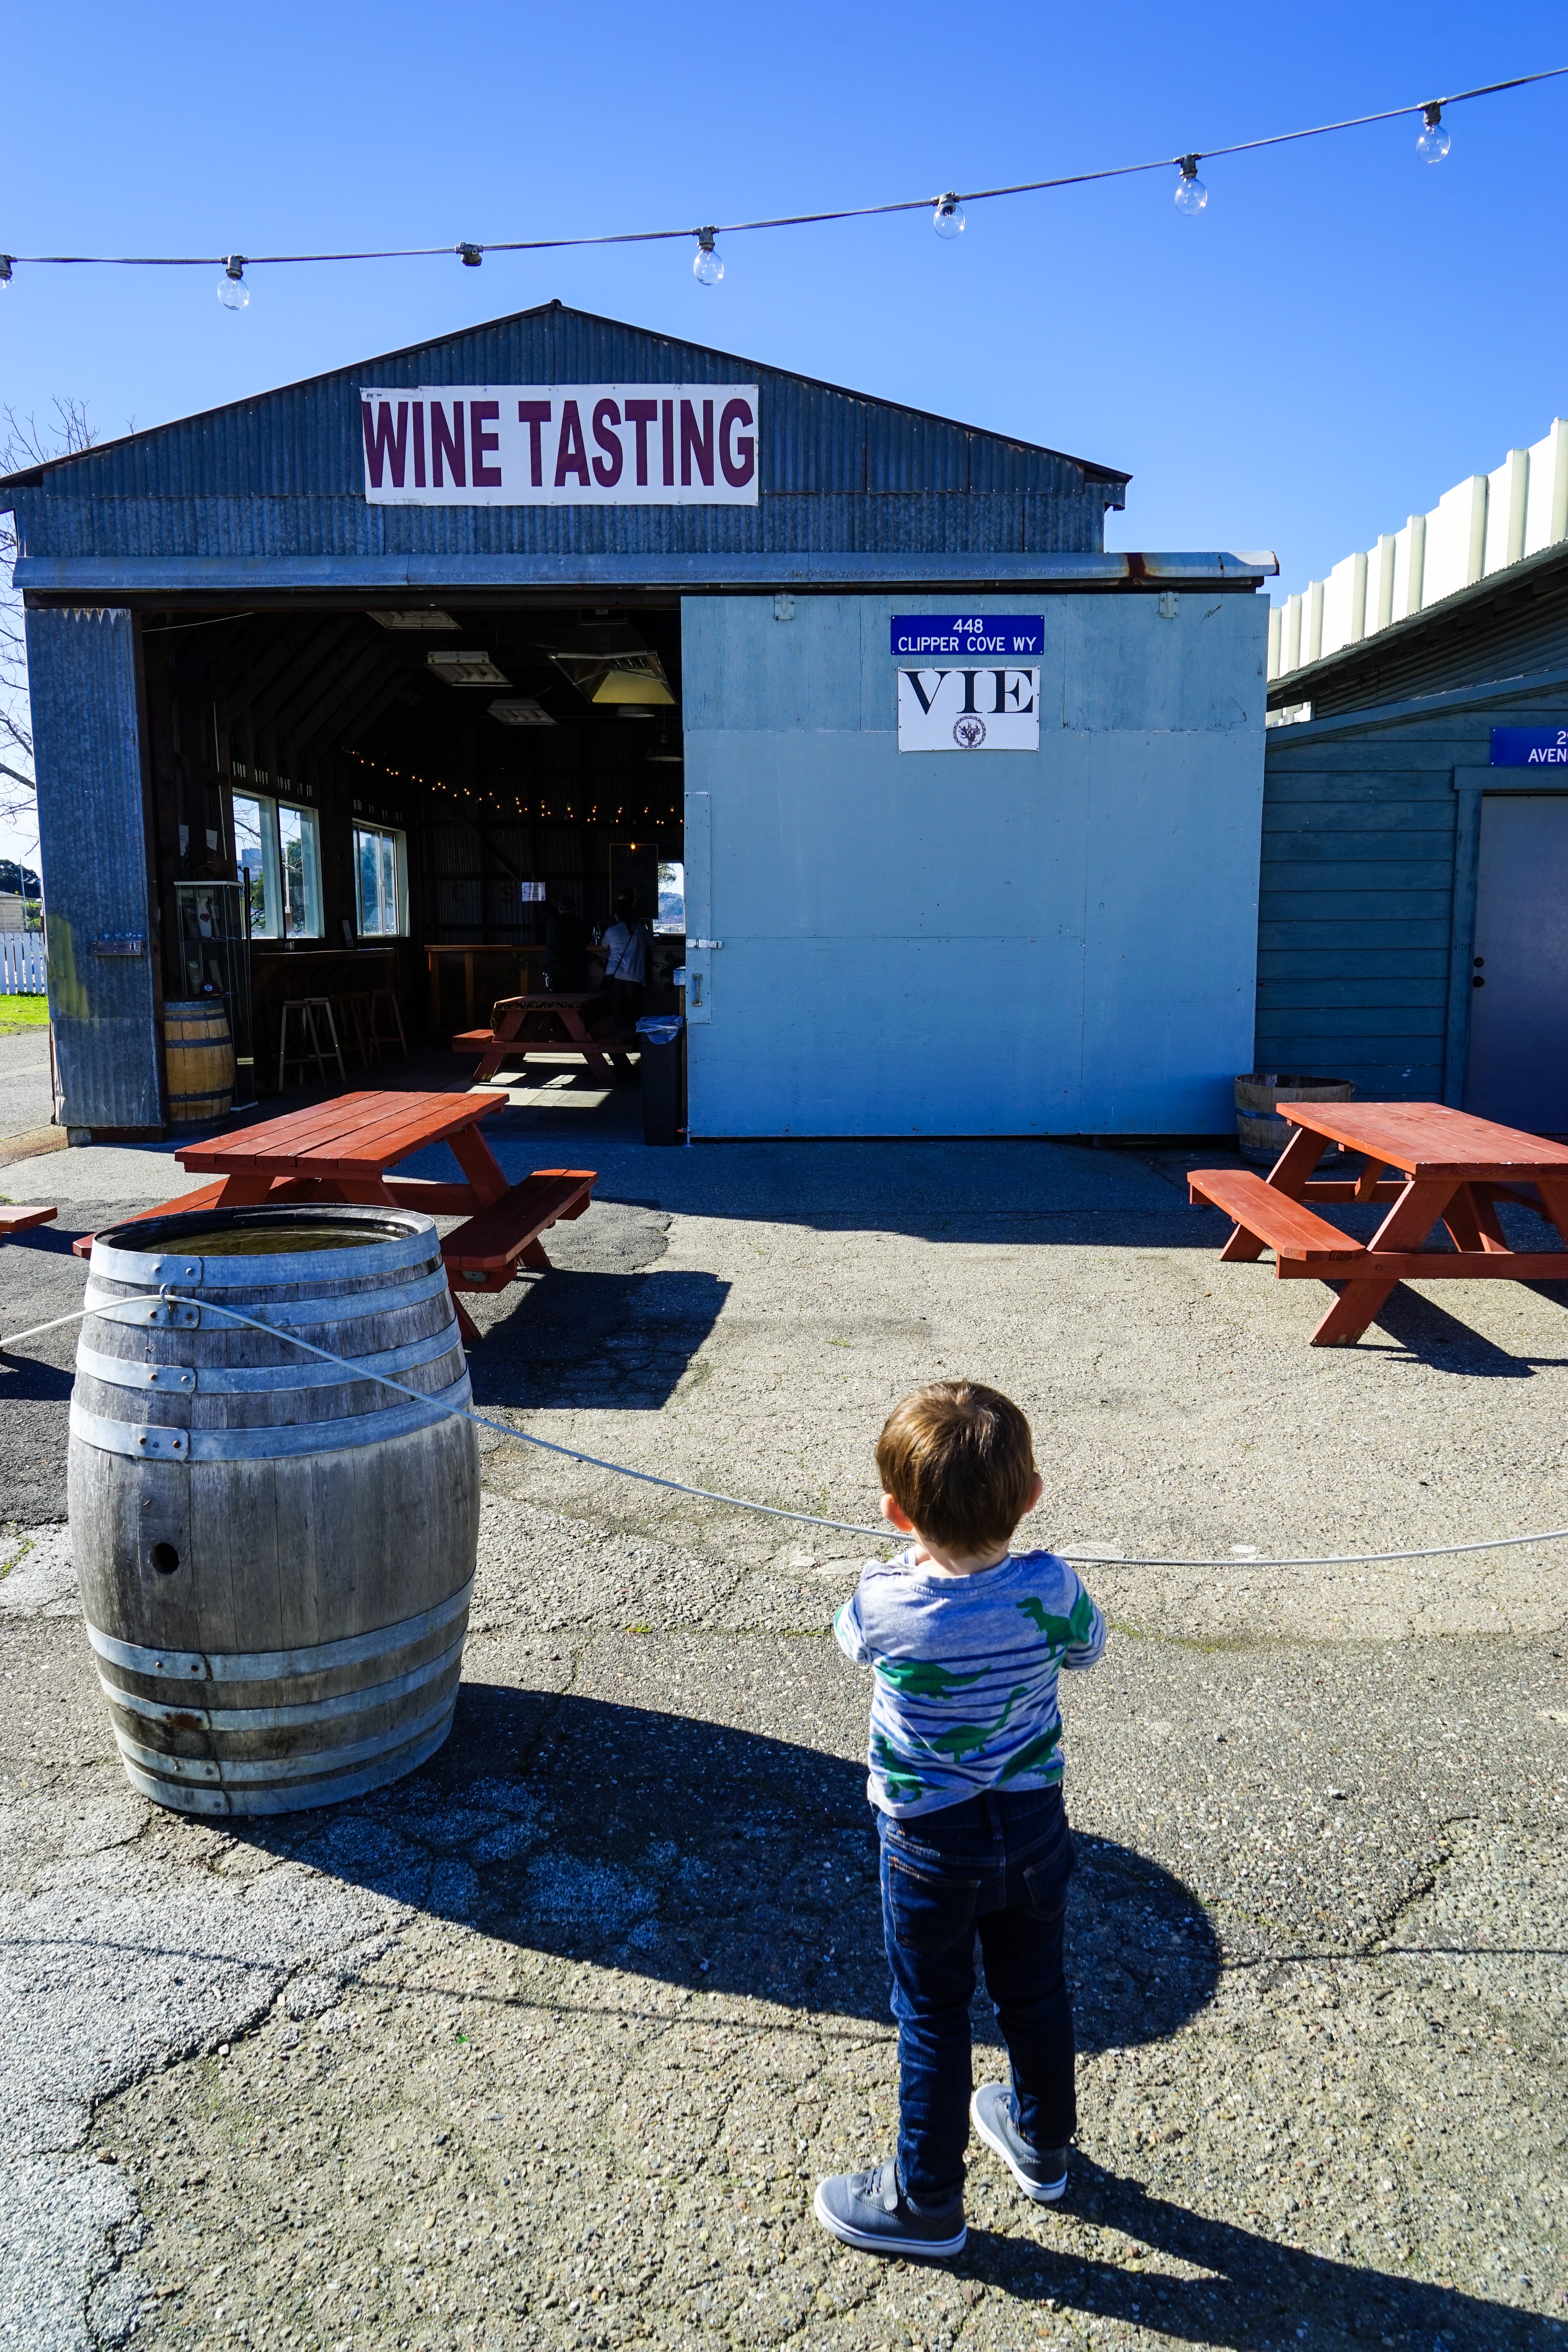 Ultimate List of Kid-Friendly Wineries on Treasure Island | San Francisco with Kids | Family Friendly Wineries | Henry and Andrew’s Guide (www.henryandandrewsguide.com)